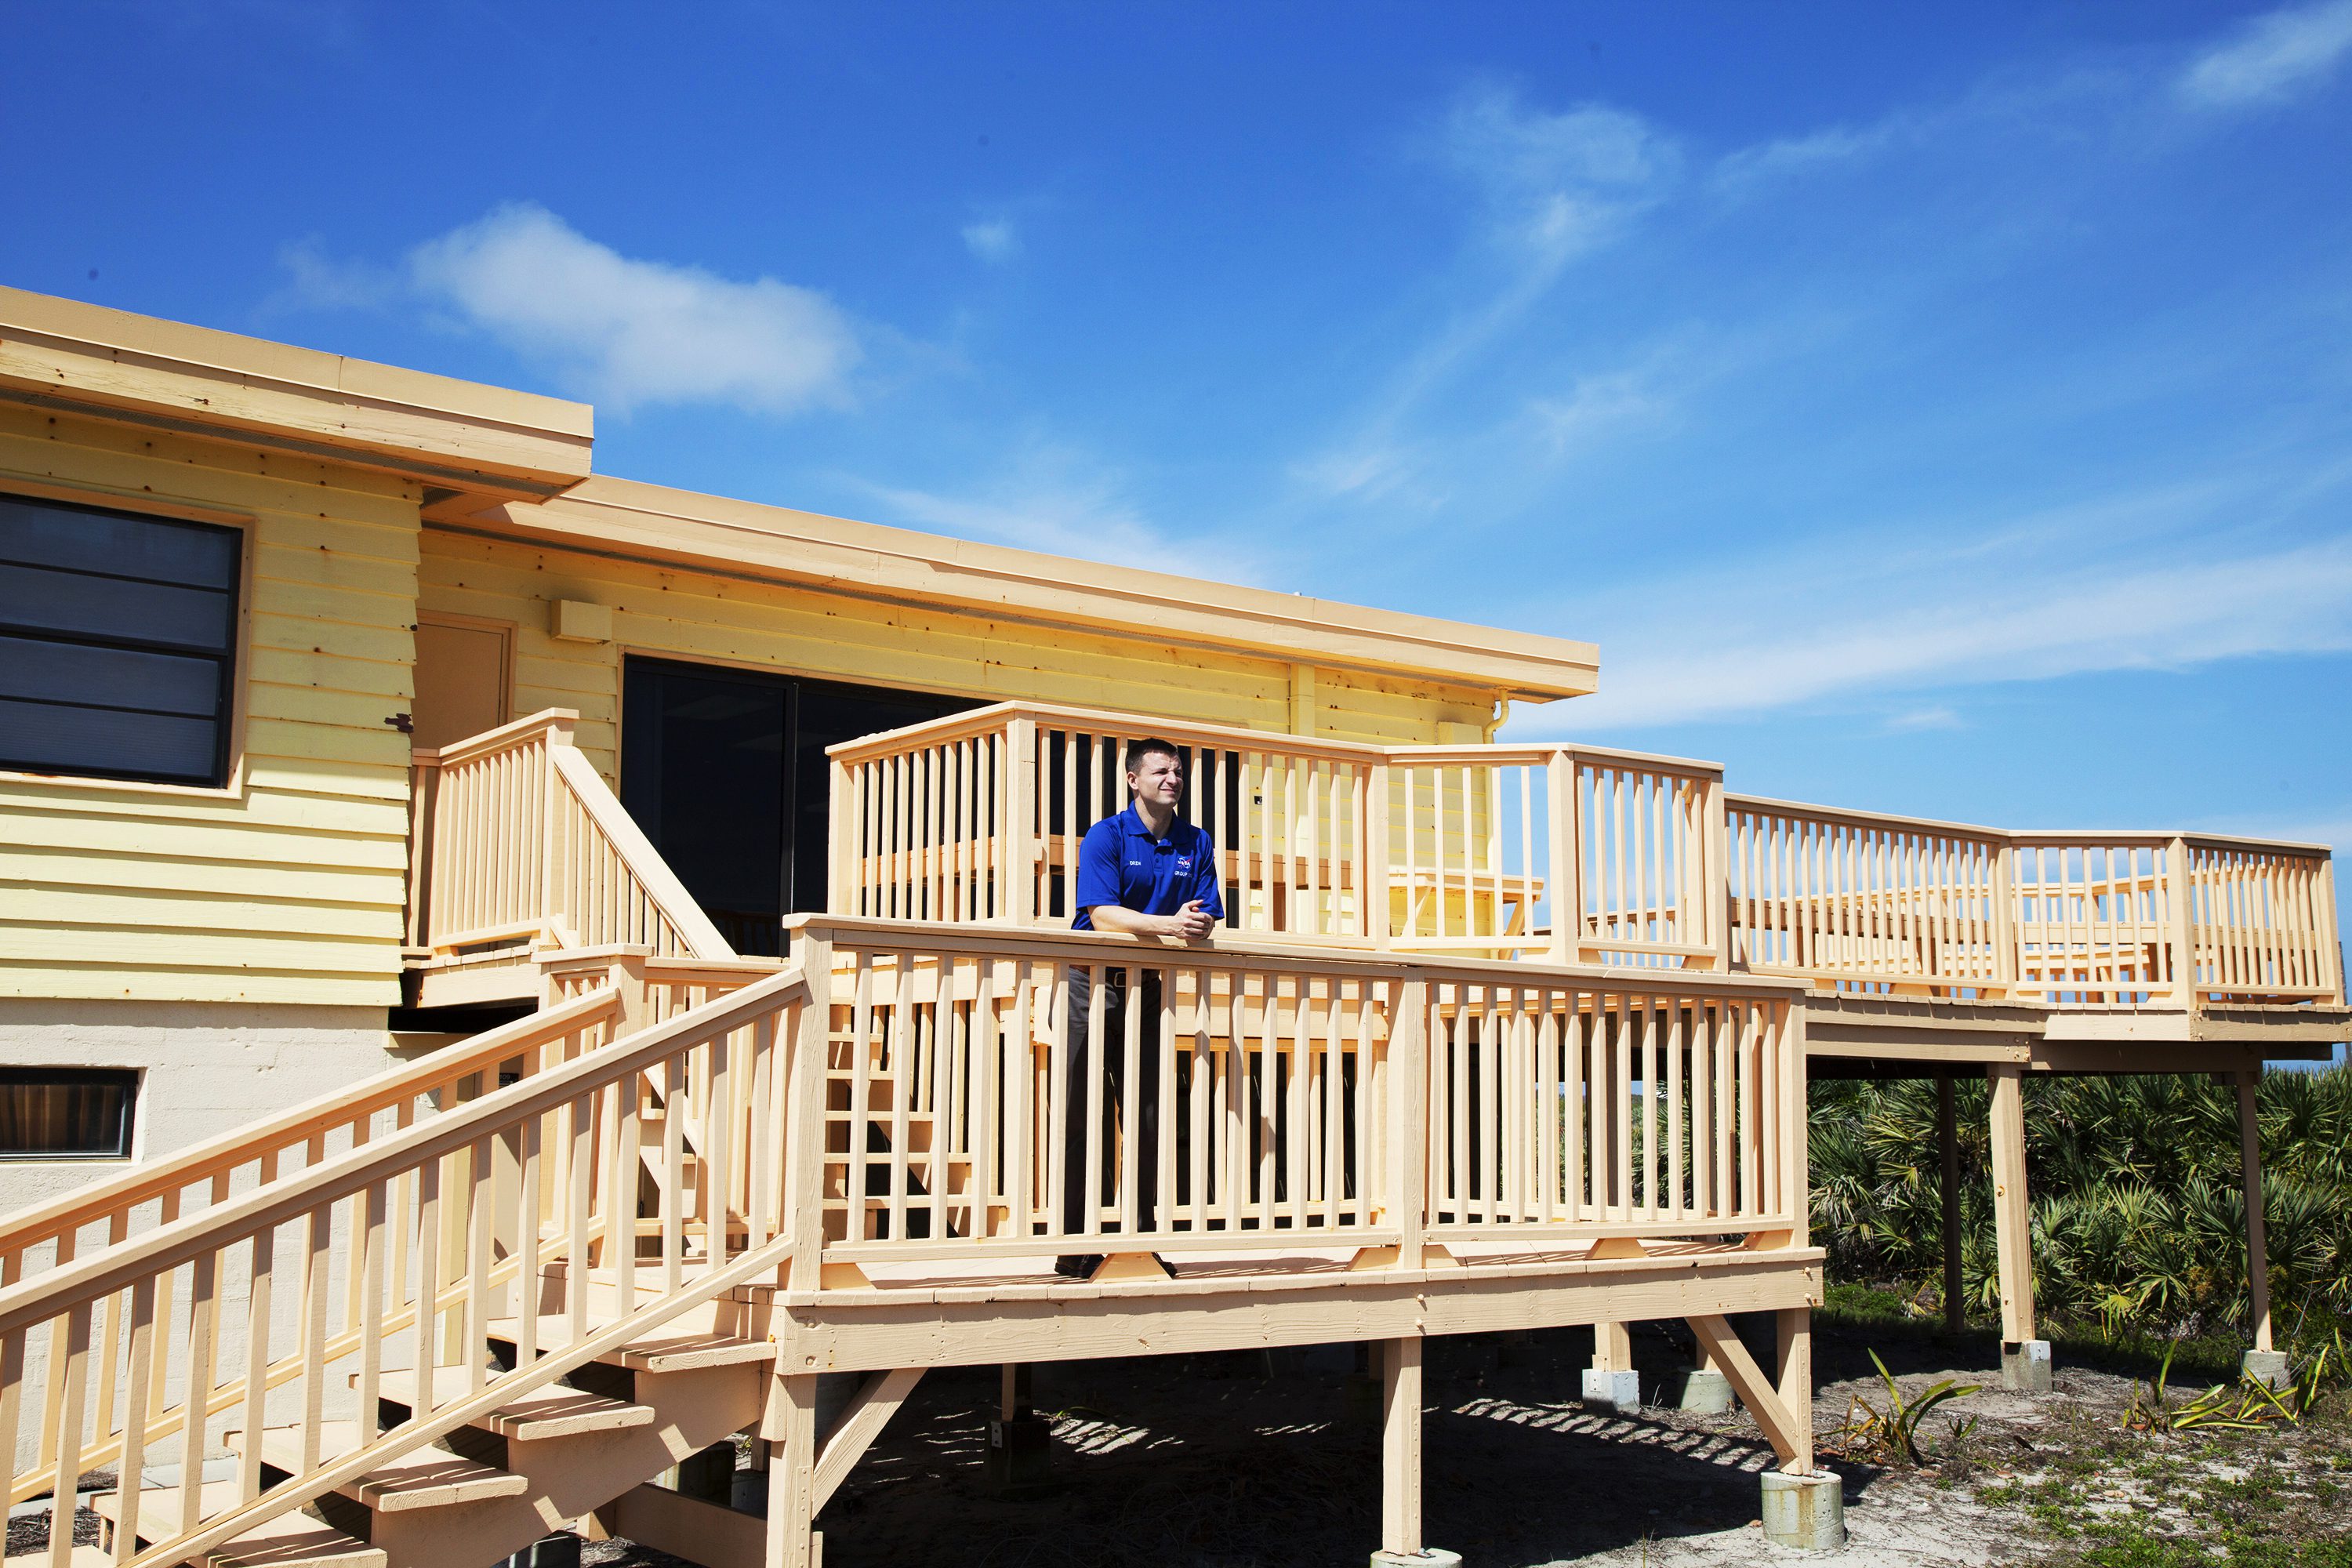 the decking of the beach house is visible in this picture with Andrew Morgan on the landing of the staircase that gets from the second floor to the beach